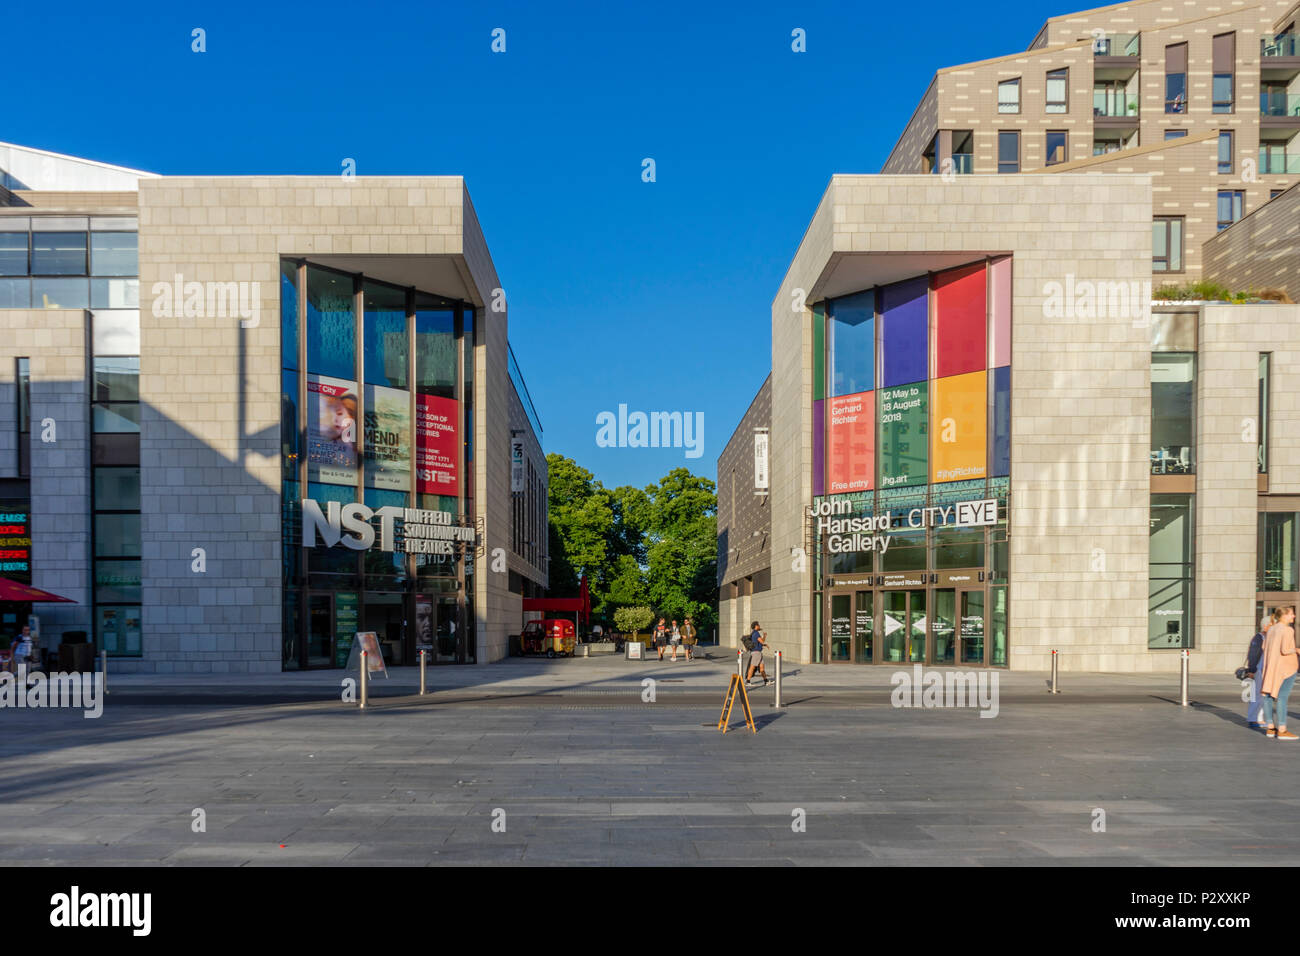 The cultural quarter in Guildhall Square with the John Hansard gallery to the right and the Nuffield Theatre (NST) to the left in Southampton 2018, UK Stock Photo